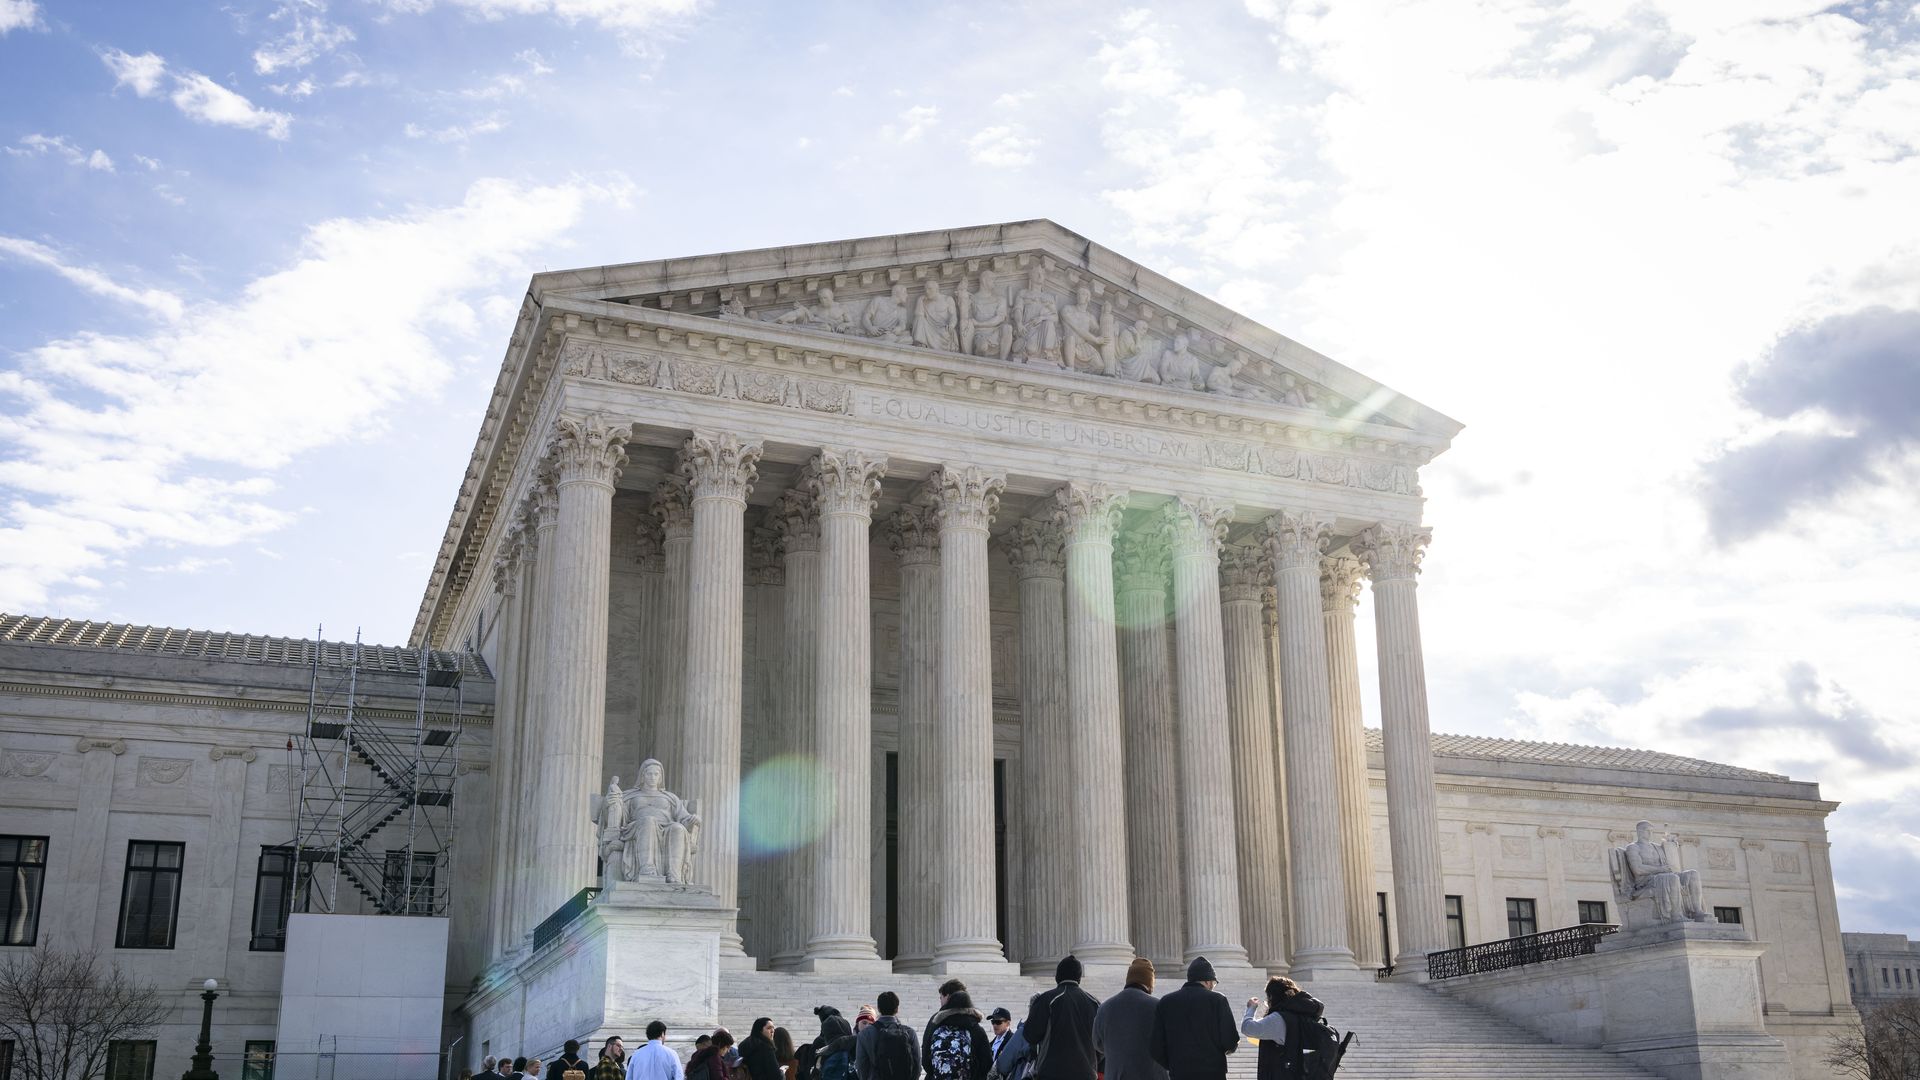 People gather in front of the U.S. Supreme Court